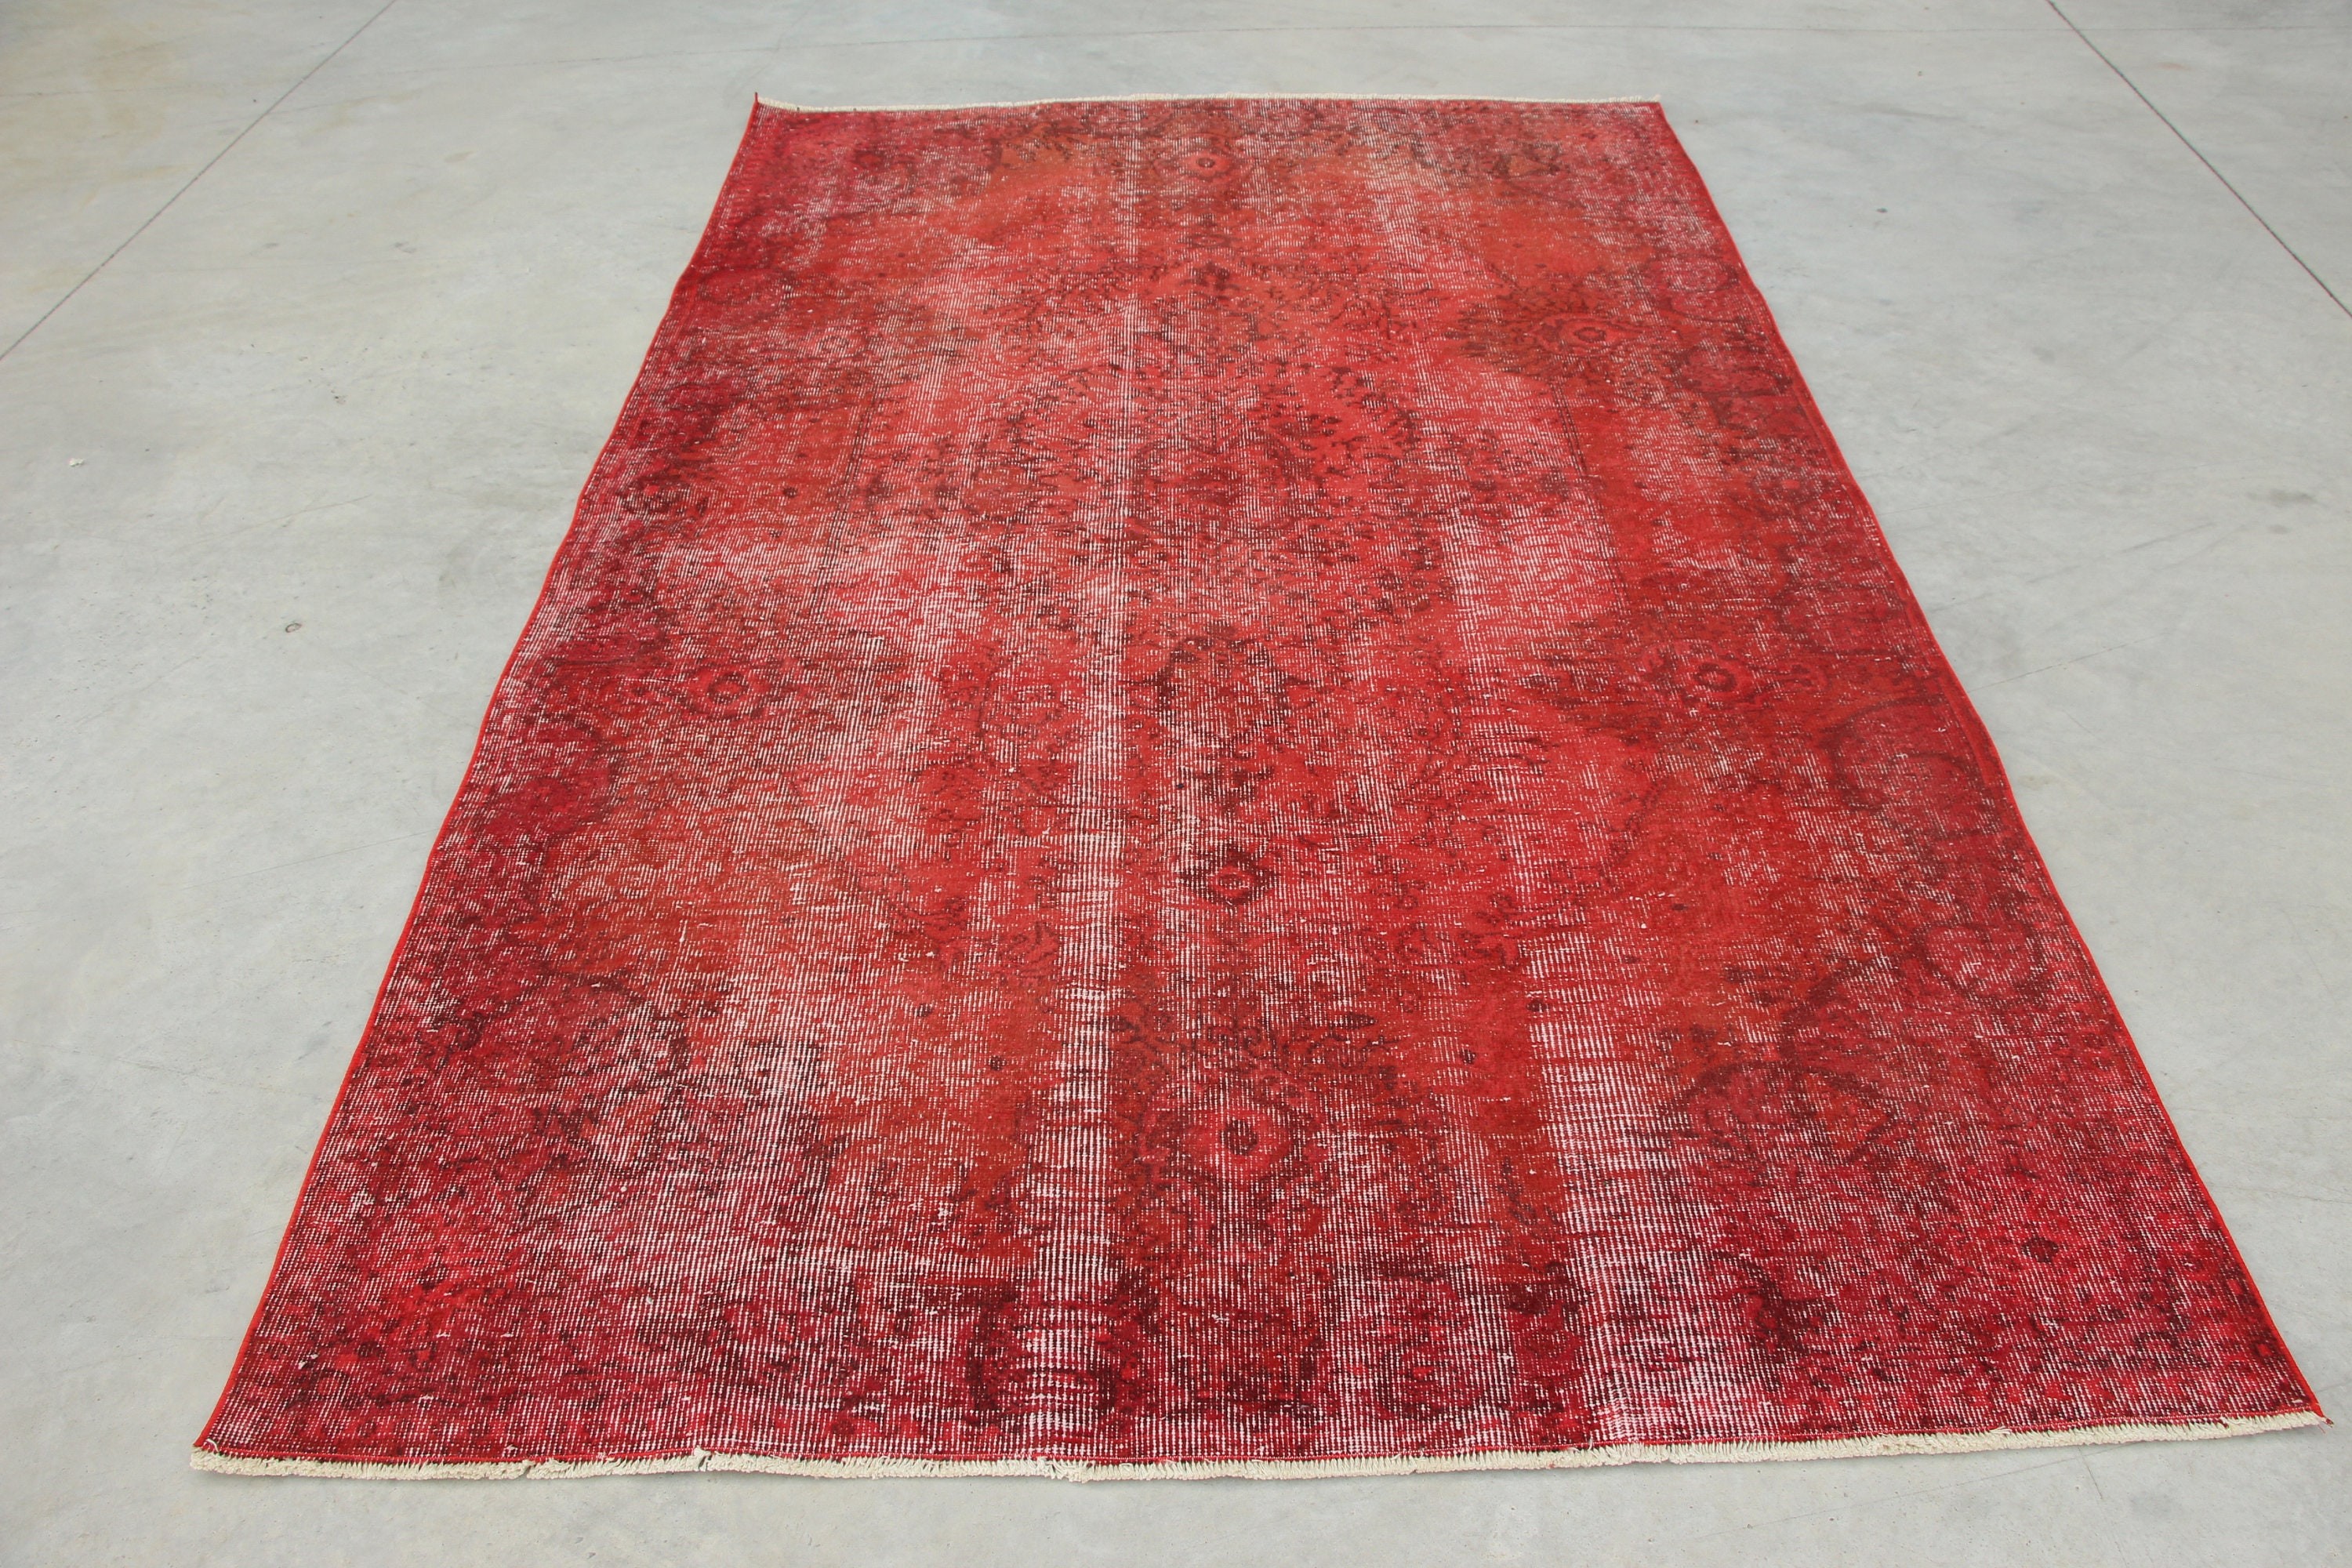 Red Wool Rugs, Turkish Rug, 5.4x8.9 ft Large Rug, Anatolian Rugs, Vintage Rug, Living Room Rugs, Salon Rug, Rugs for Salon, Kitchen Rugs